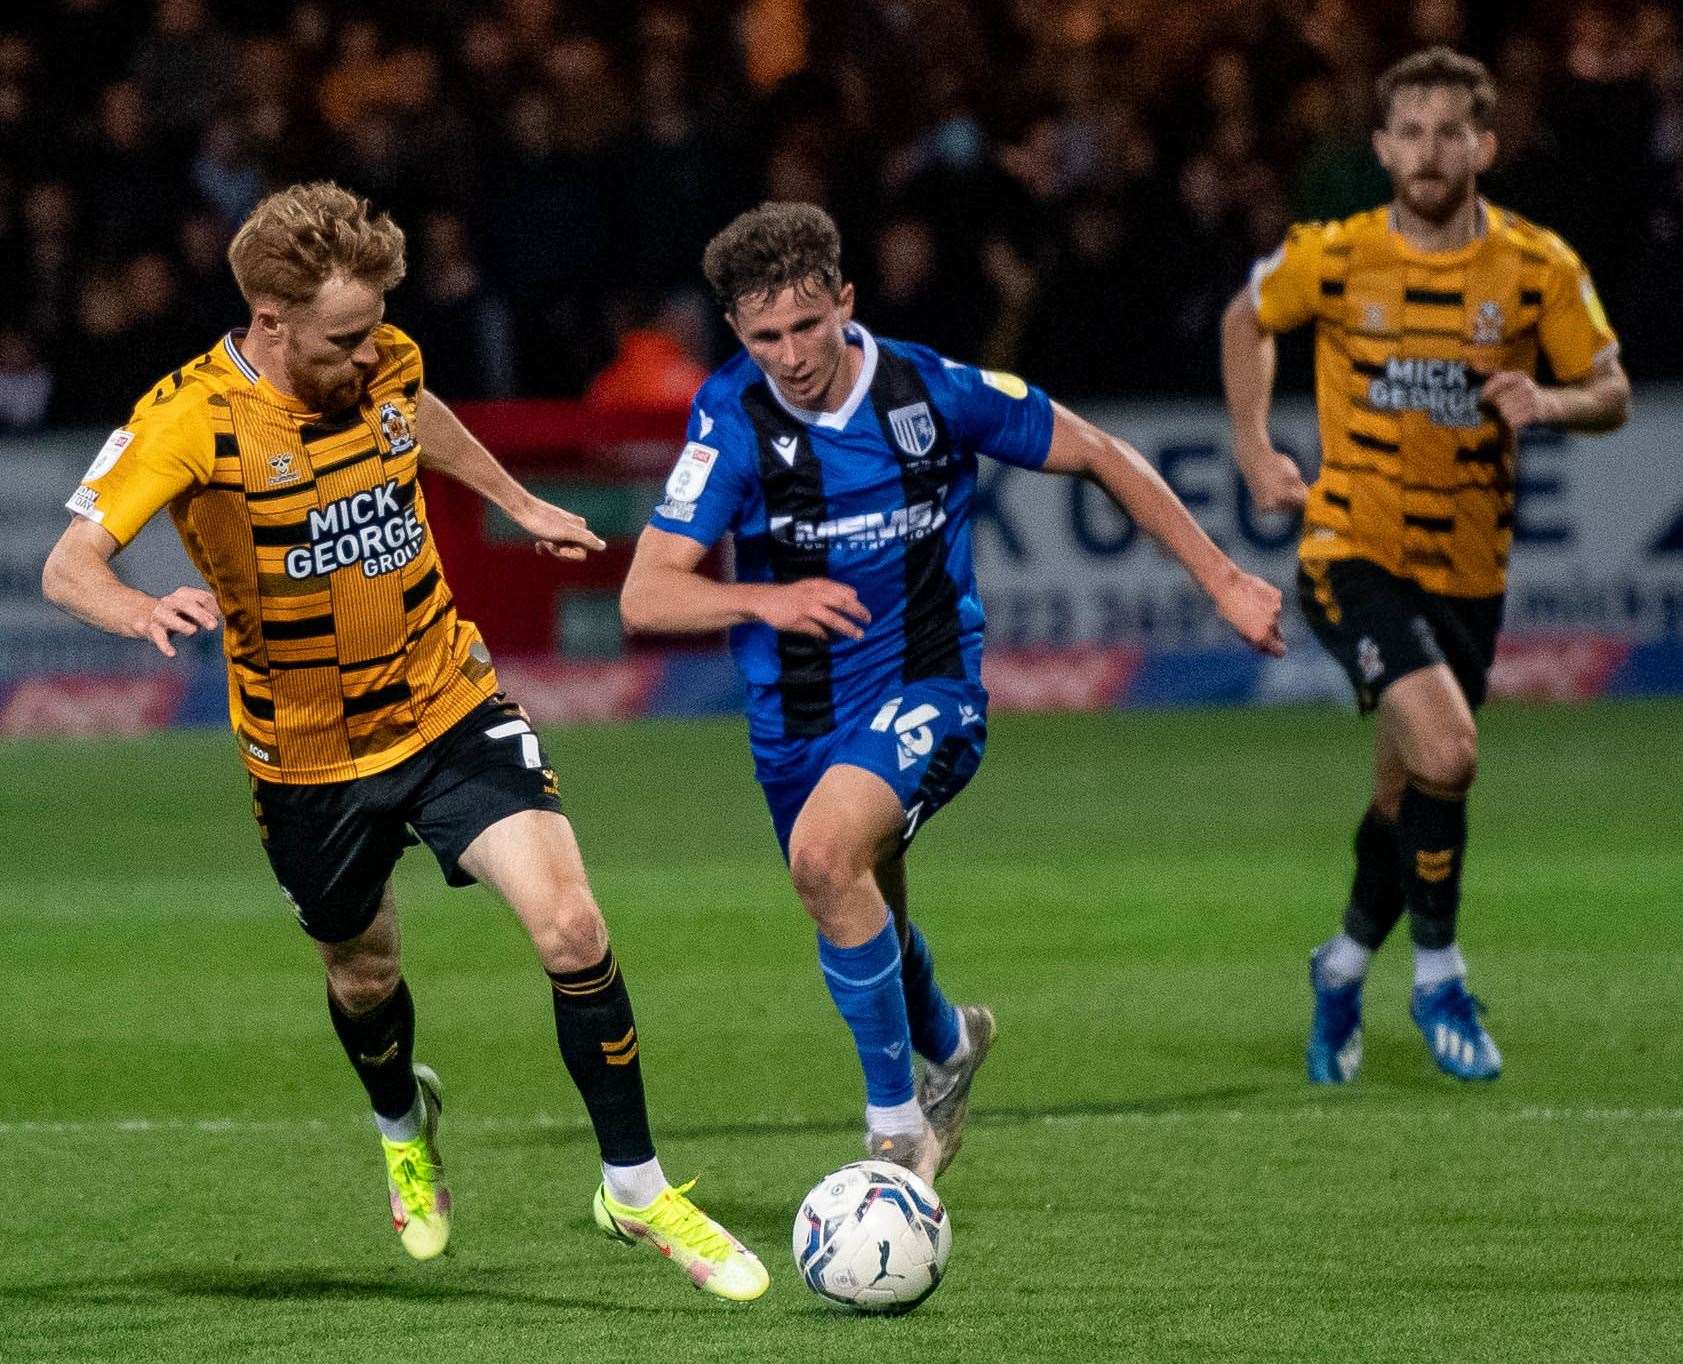 Dan Adshead chases down James Brophy in last night's game Picture: Keith Heppell